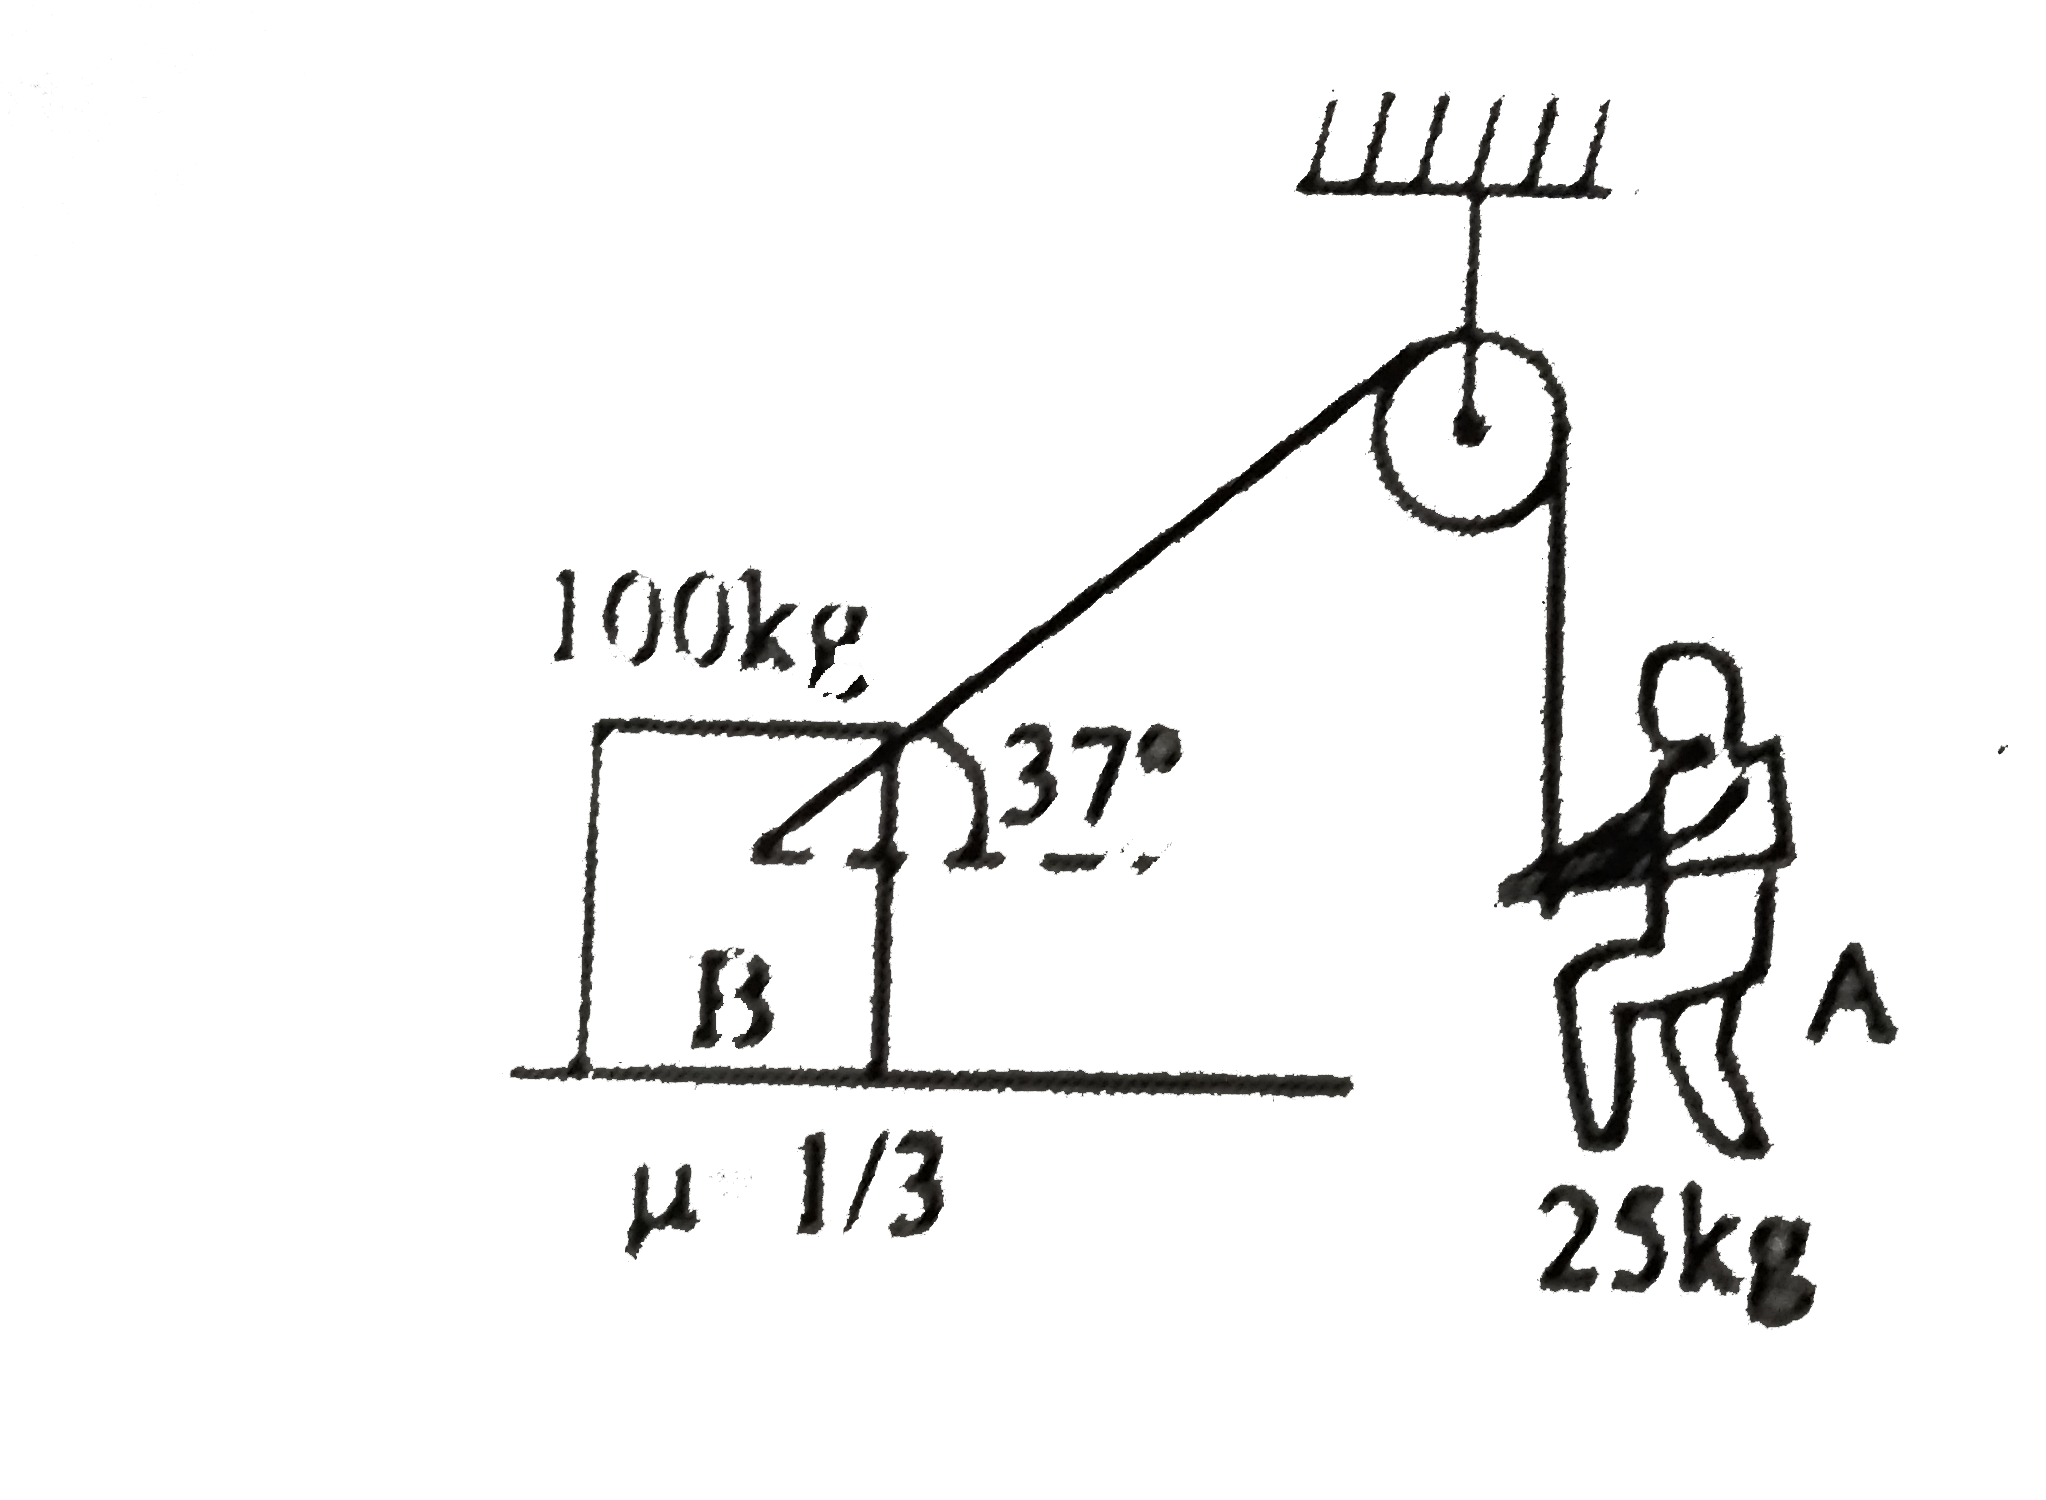 Block B of mass 100 kg rests on a rough surface of friction coeffcient mu= 1//3. A rope is tied to block B as shown in figure. The maximum acceleration with which boy A of 24 kg can climbs on rope without making block move is :